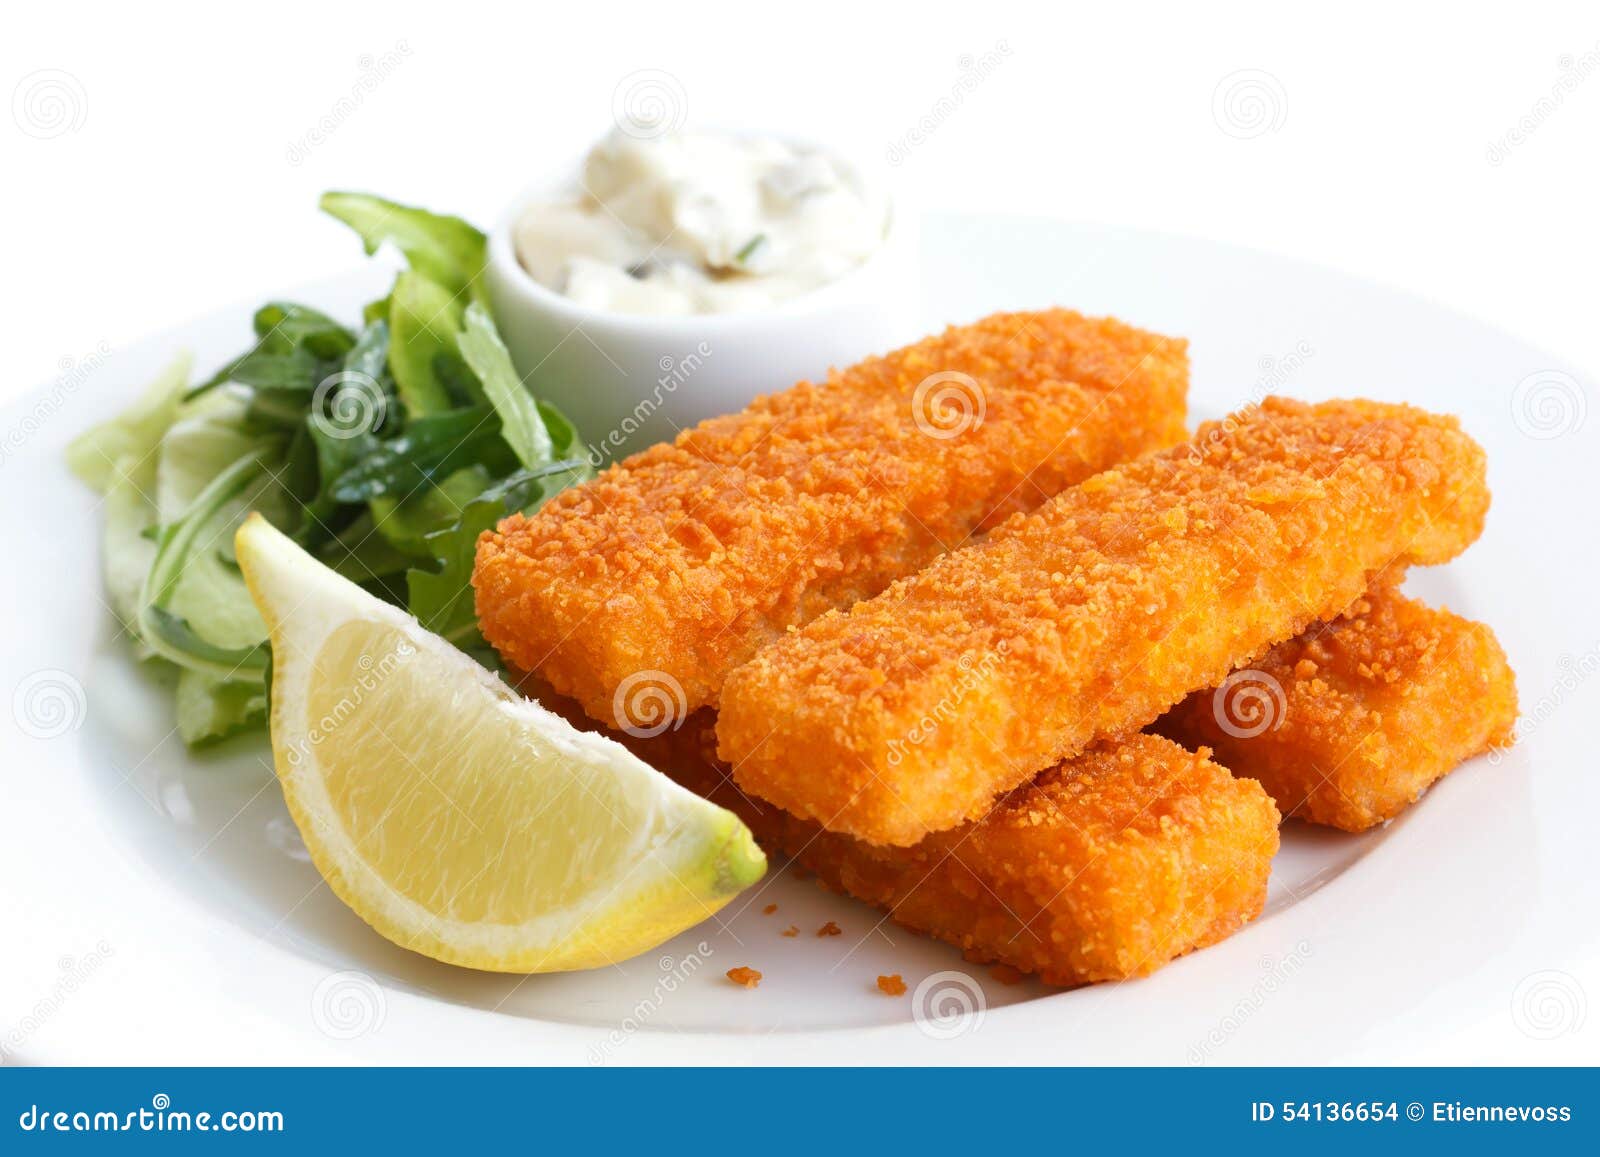 Golden Fried Fish Fingers with Lemon and Tartar Sauce Stock Photo - Image  of fastfood, fish: 54136654